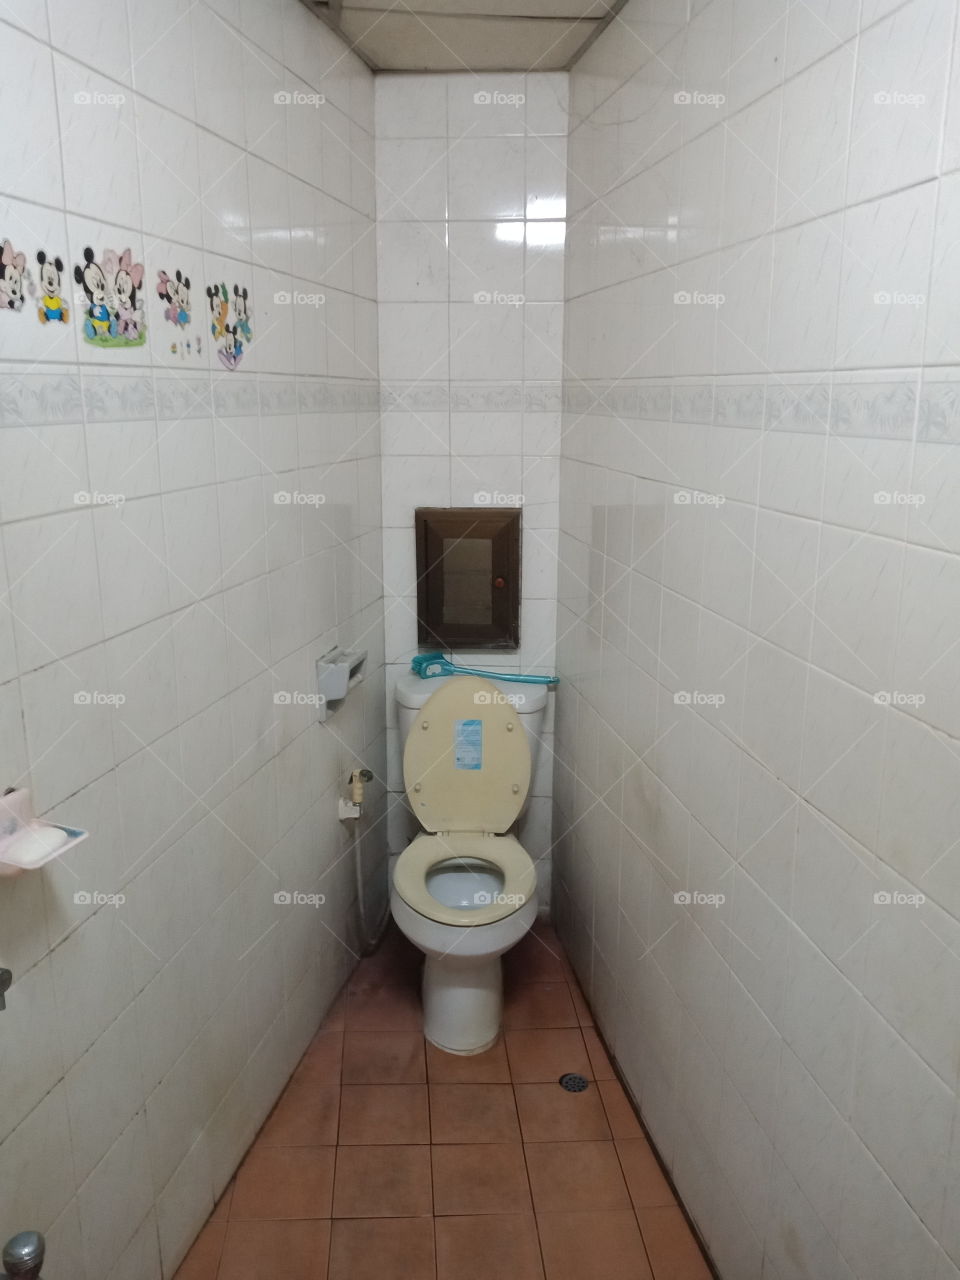 Perspective view of the white restroom